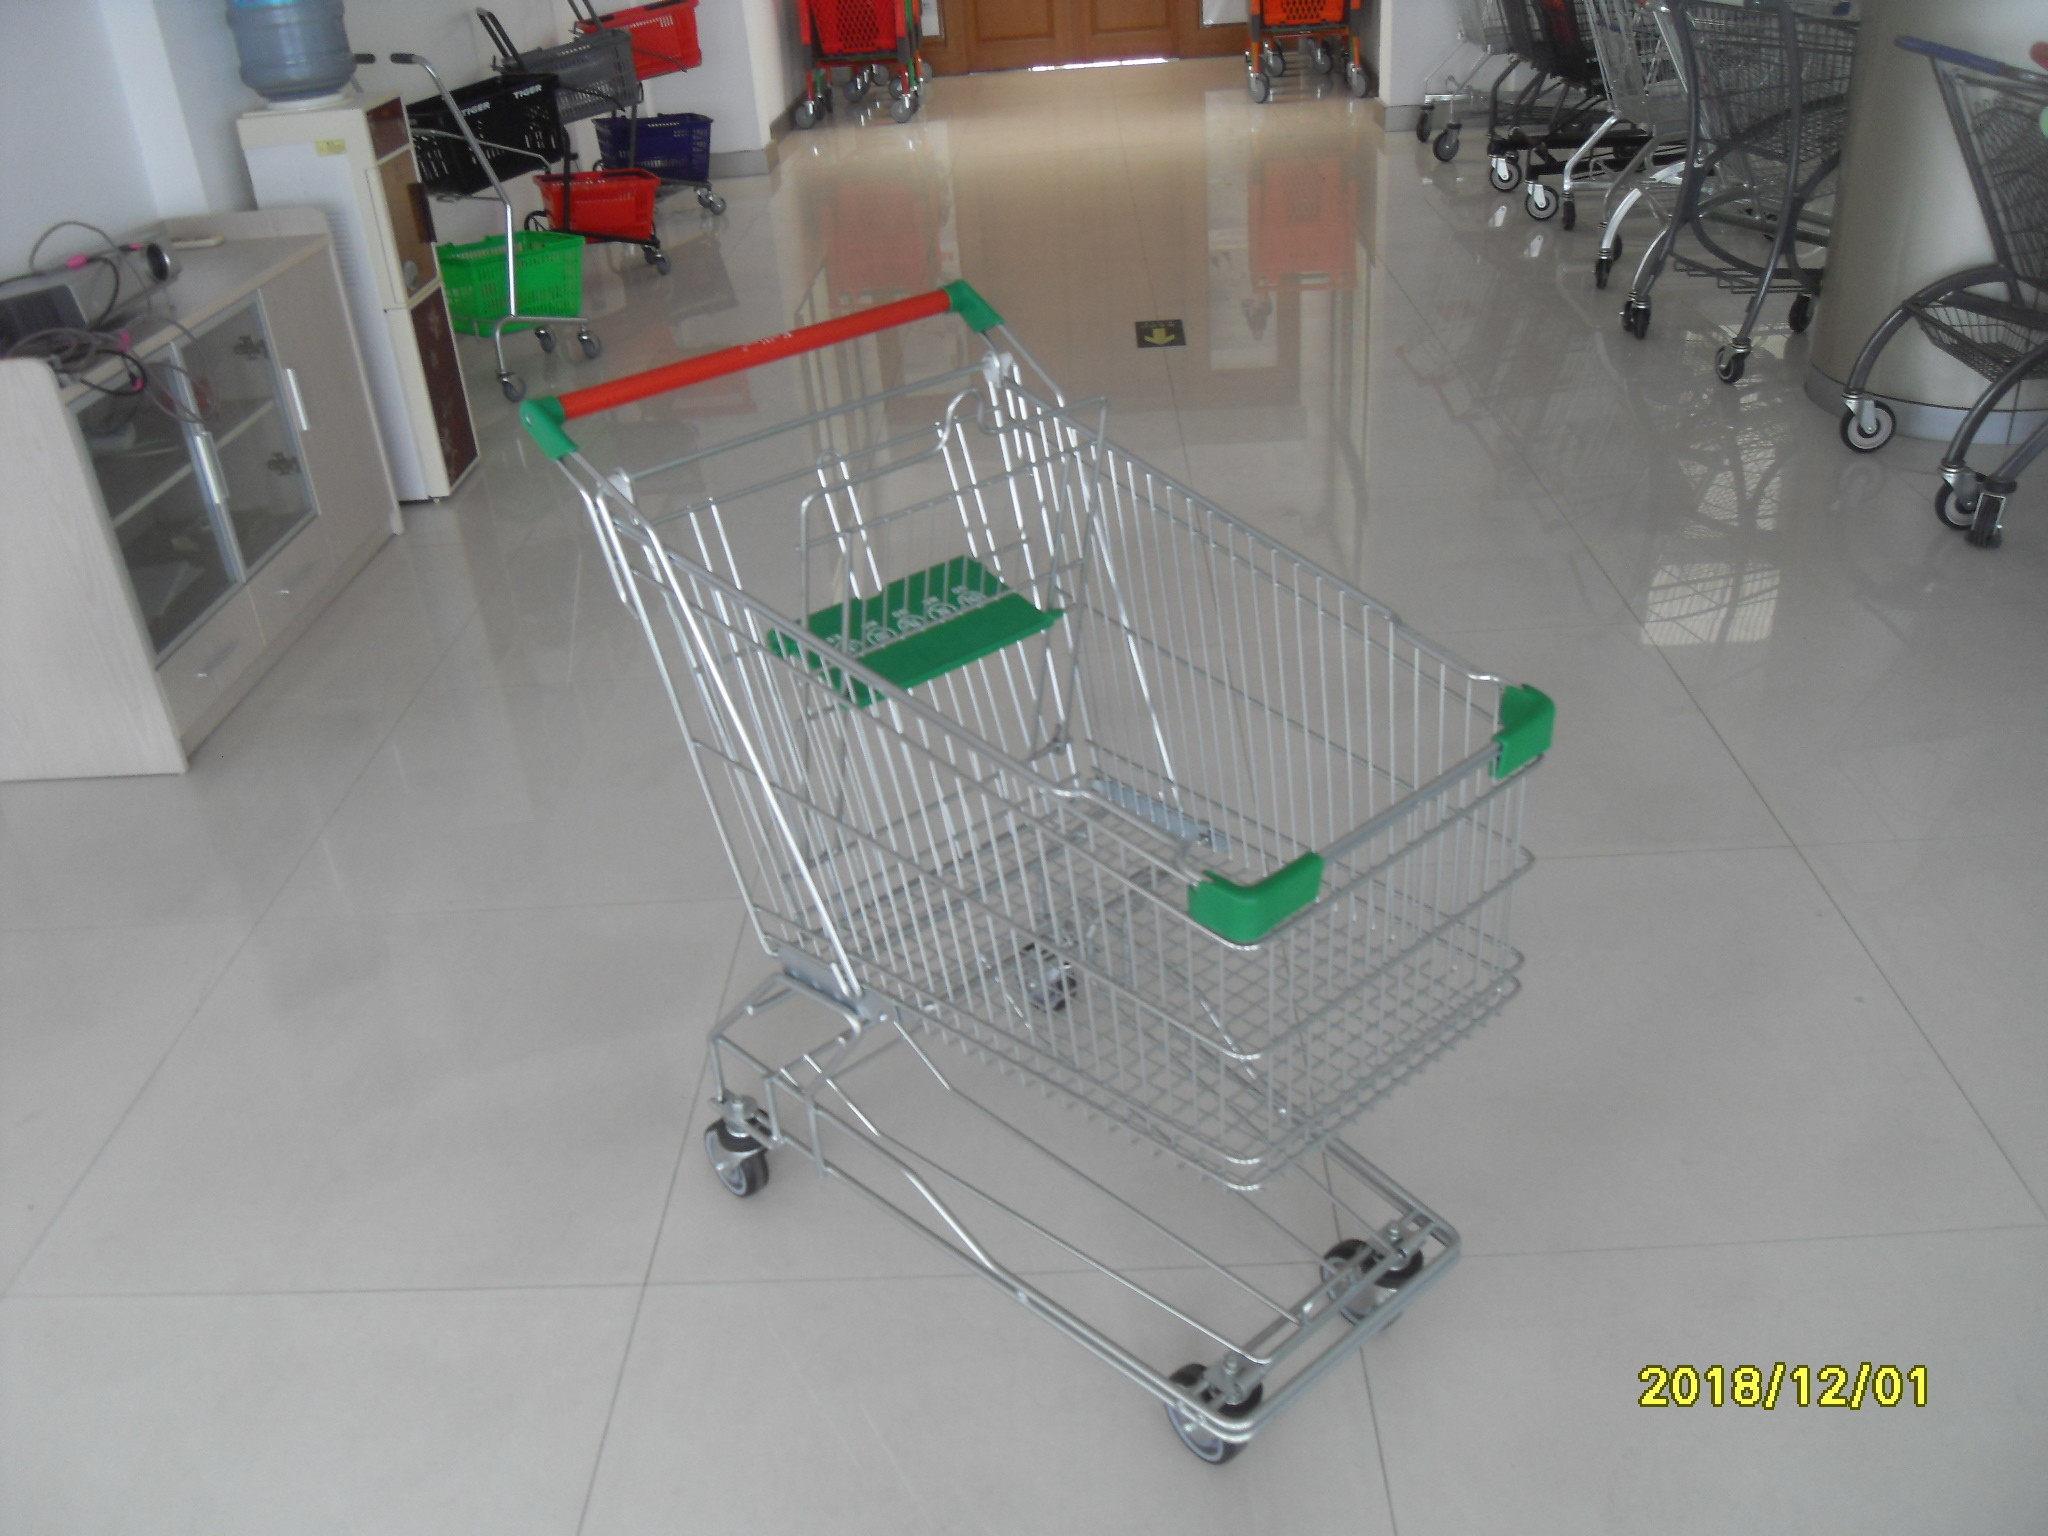 125 L Wire Shopping Trolley , Compact Grocery Cart 902x557x985mm Size